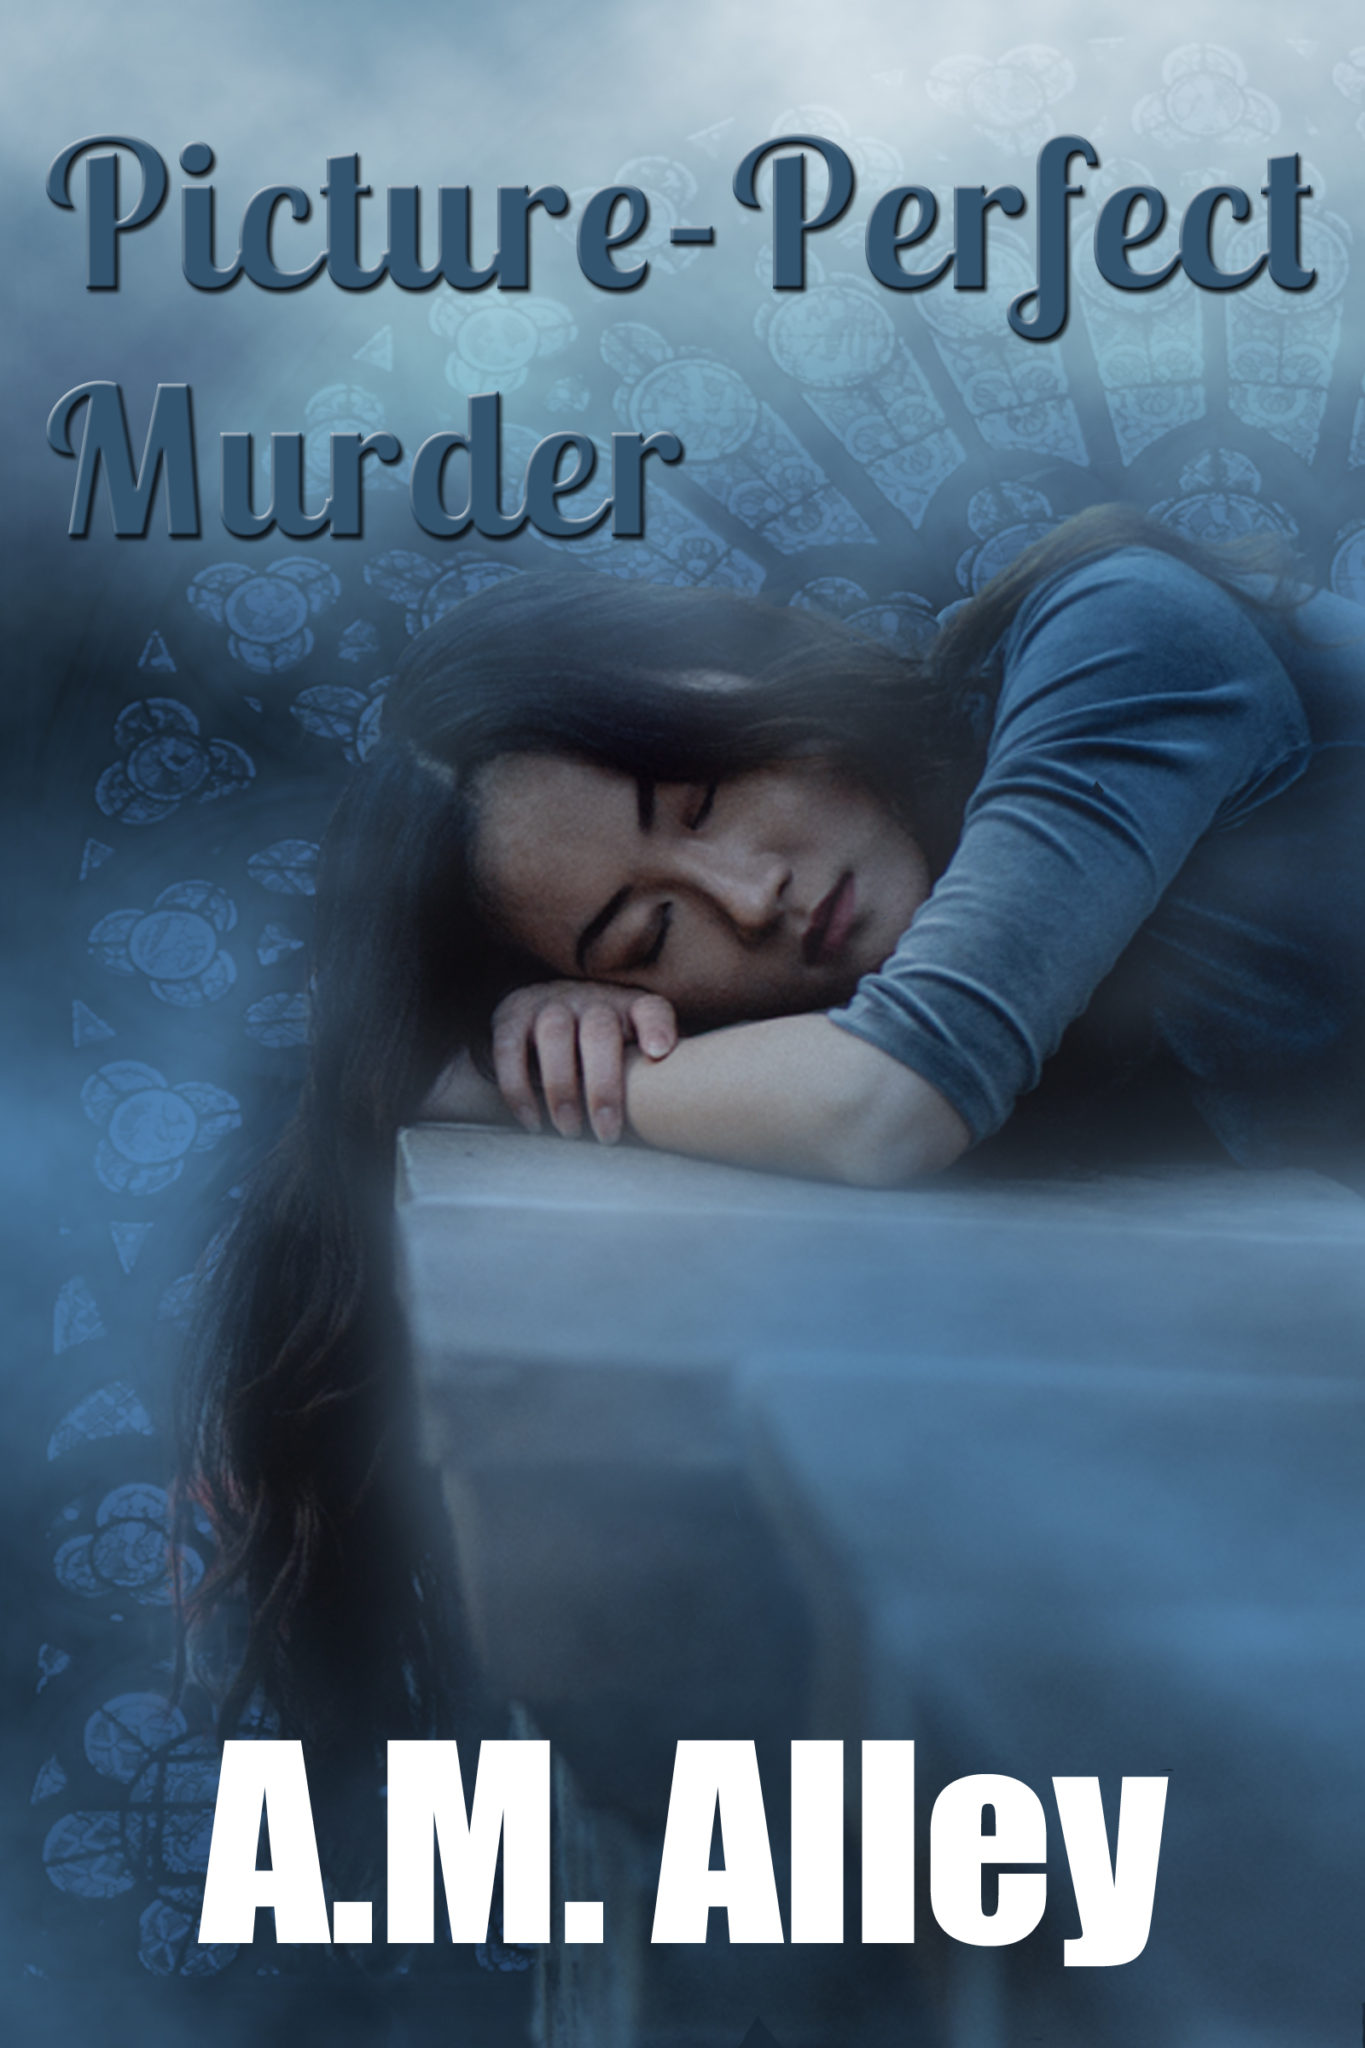 FREE: Picture-Perfect Murder by A.M. Alley